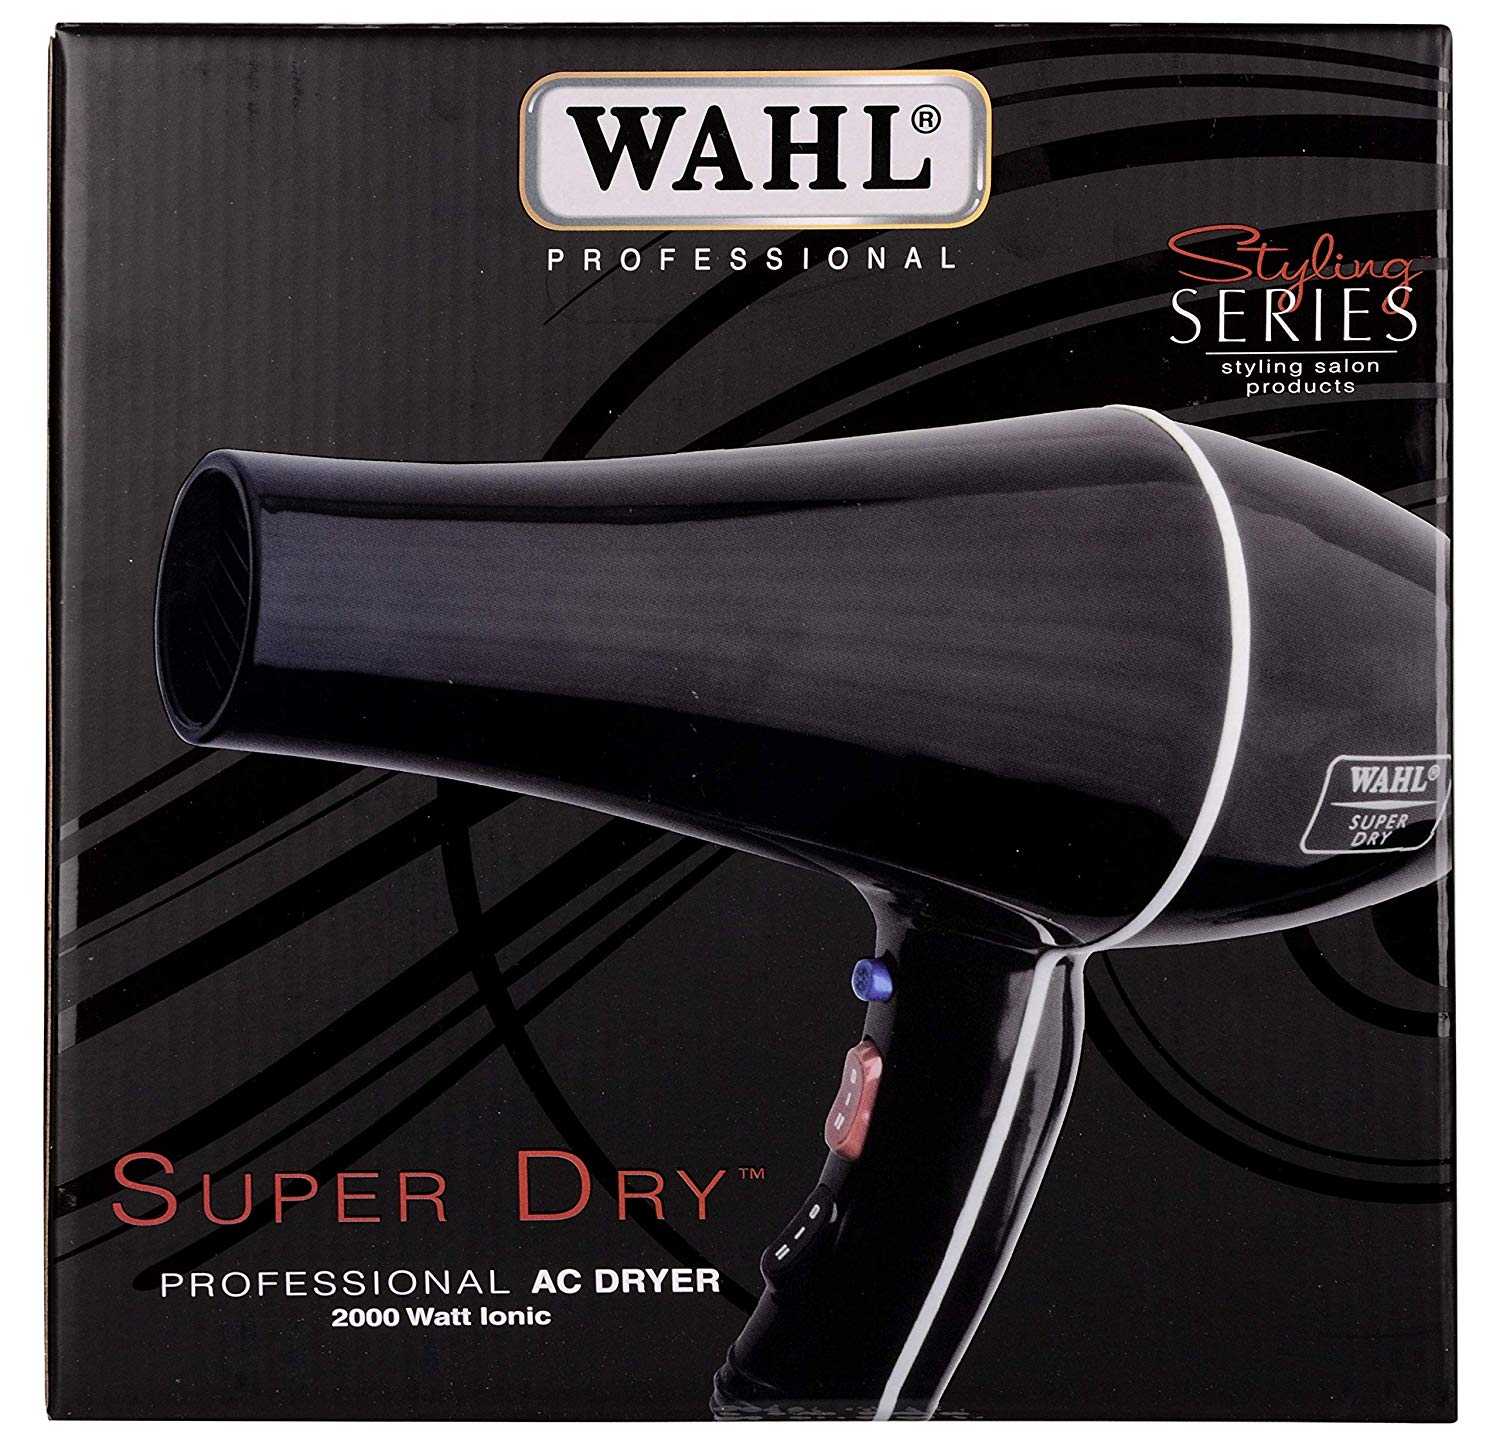 Wahl Super Dry Professional Styling Hair Dryer (5439-024)